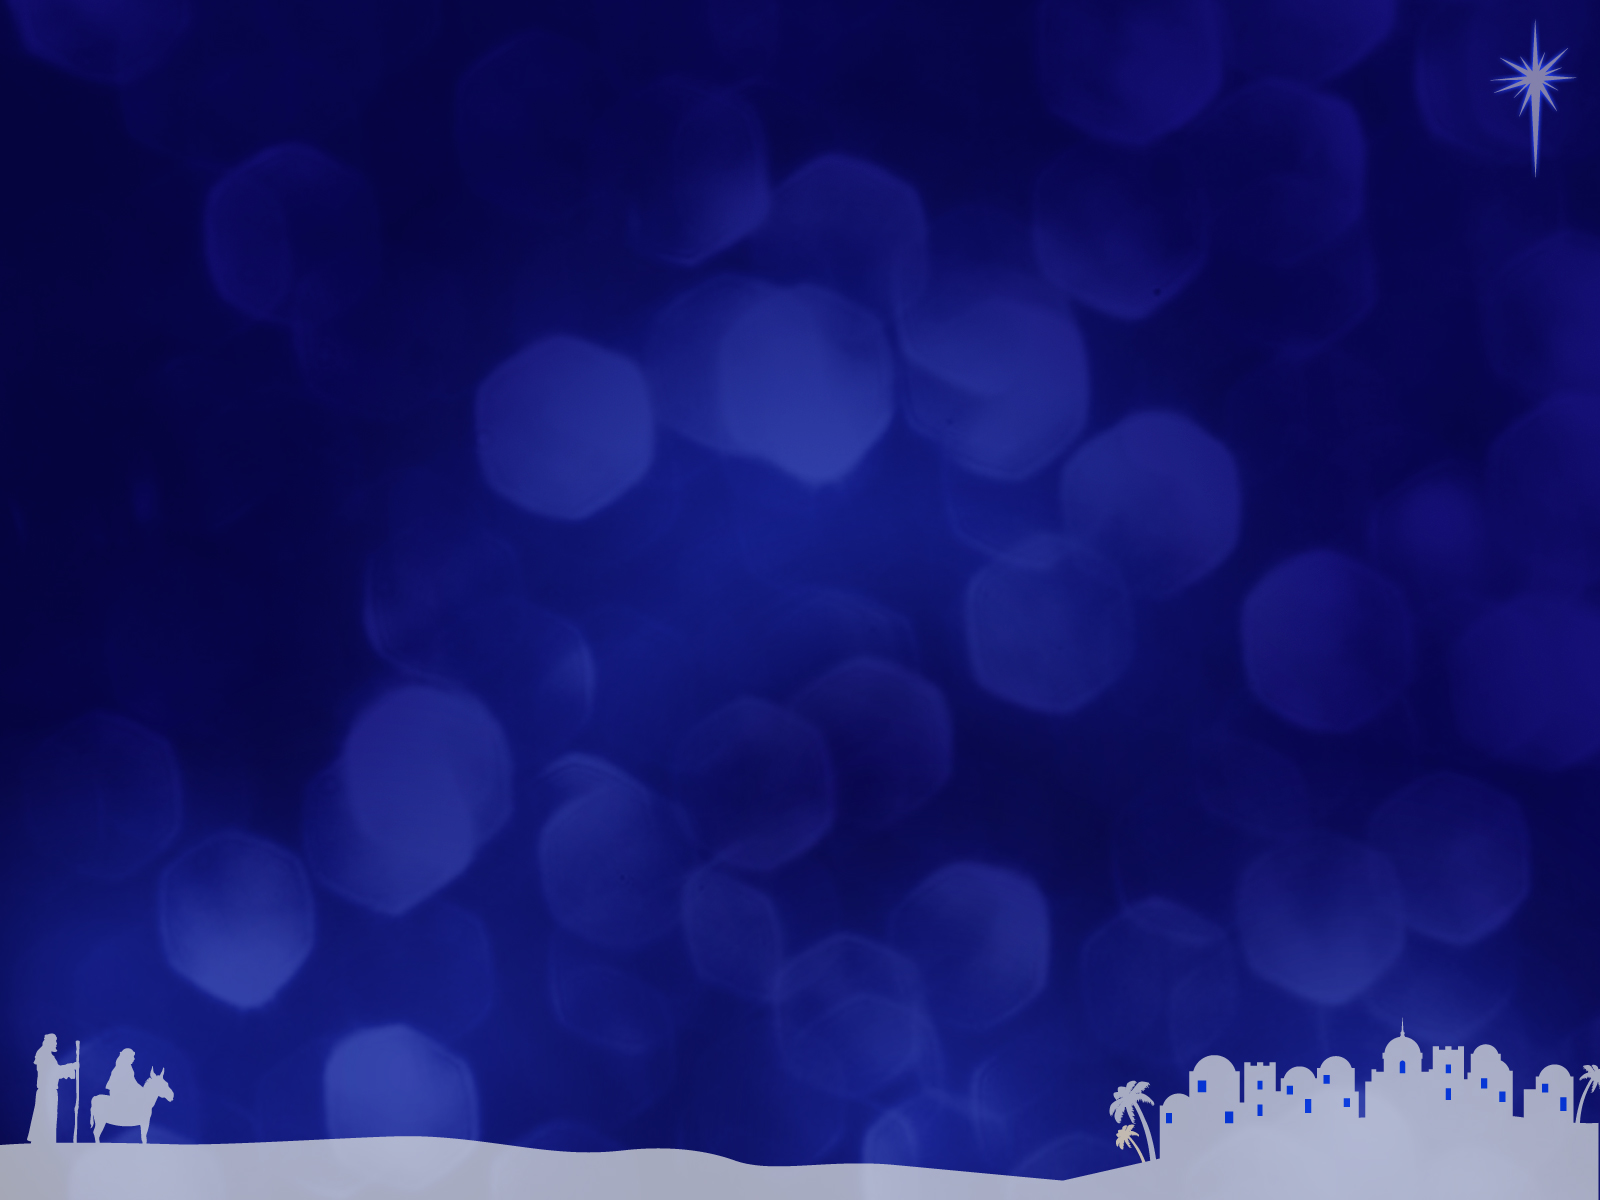 FREE Advent PowerPoint Backgrounds | Intersections